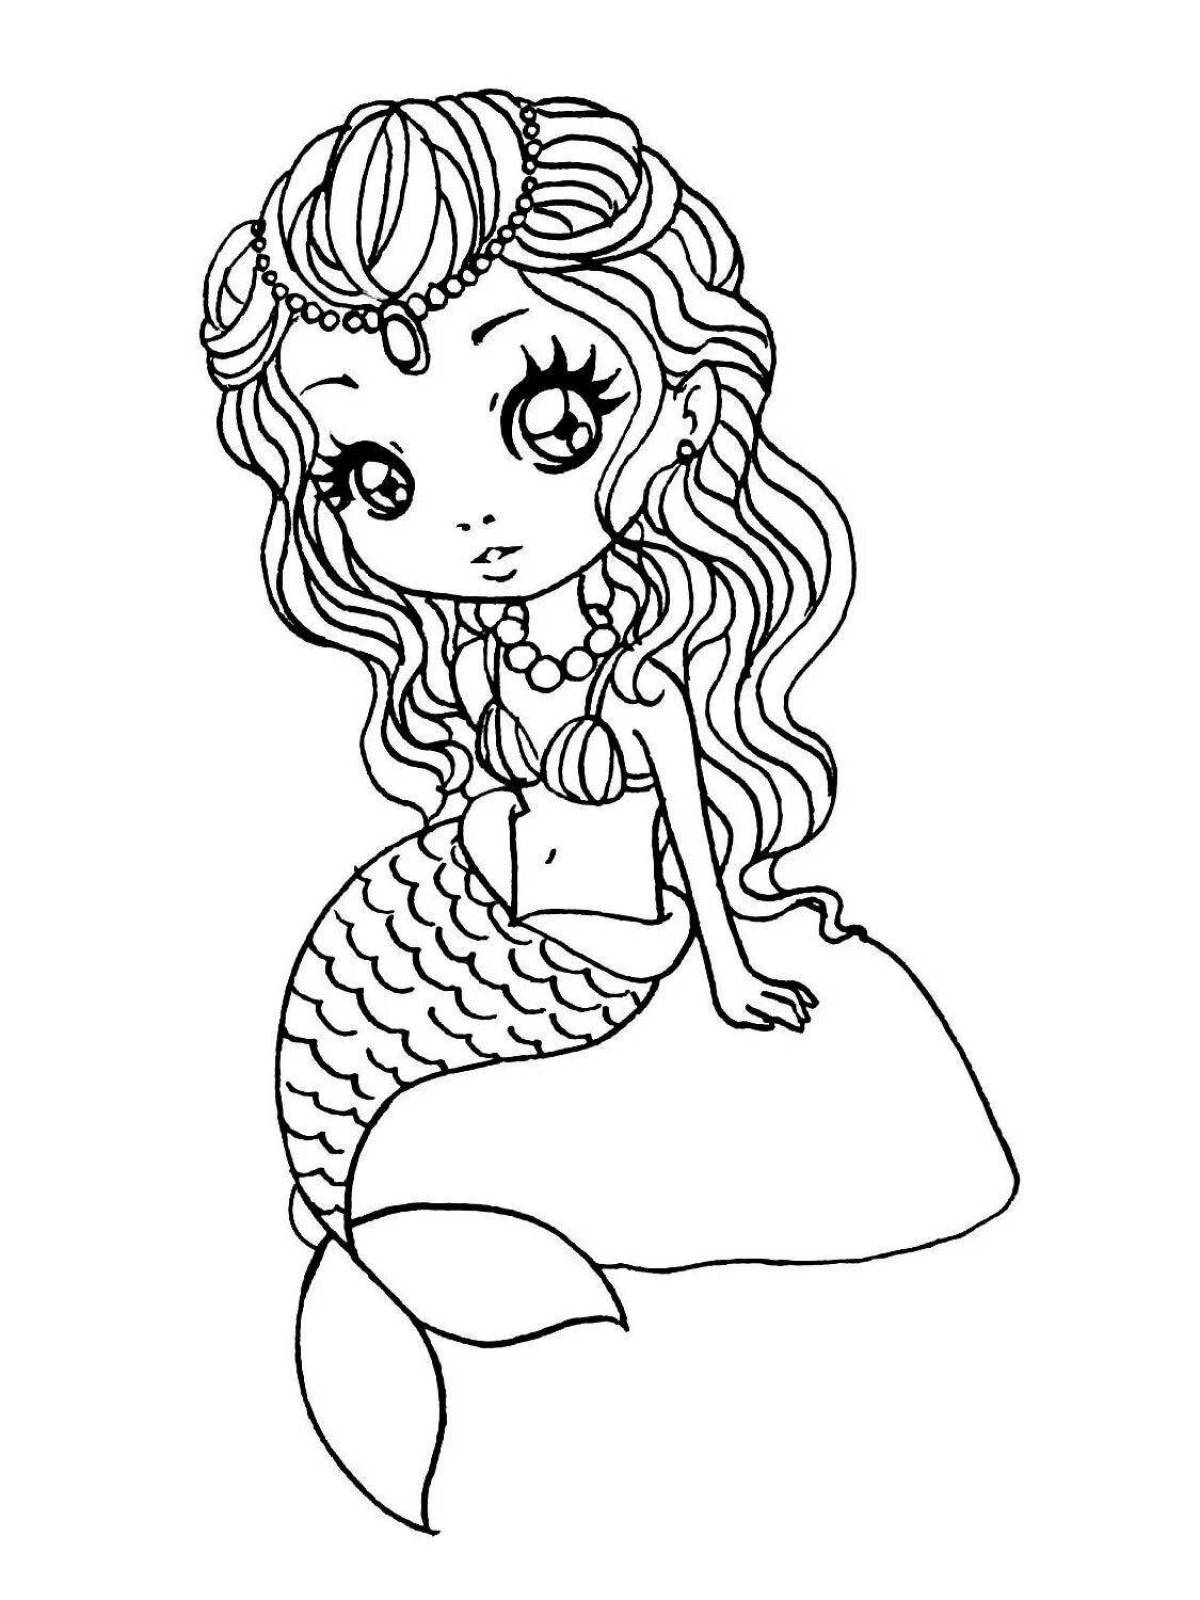 Coloring page charming mermaids